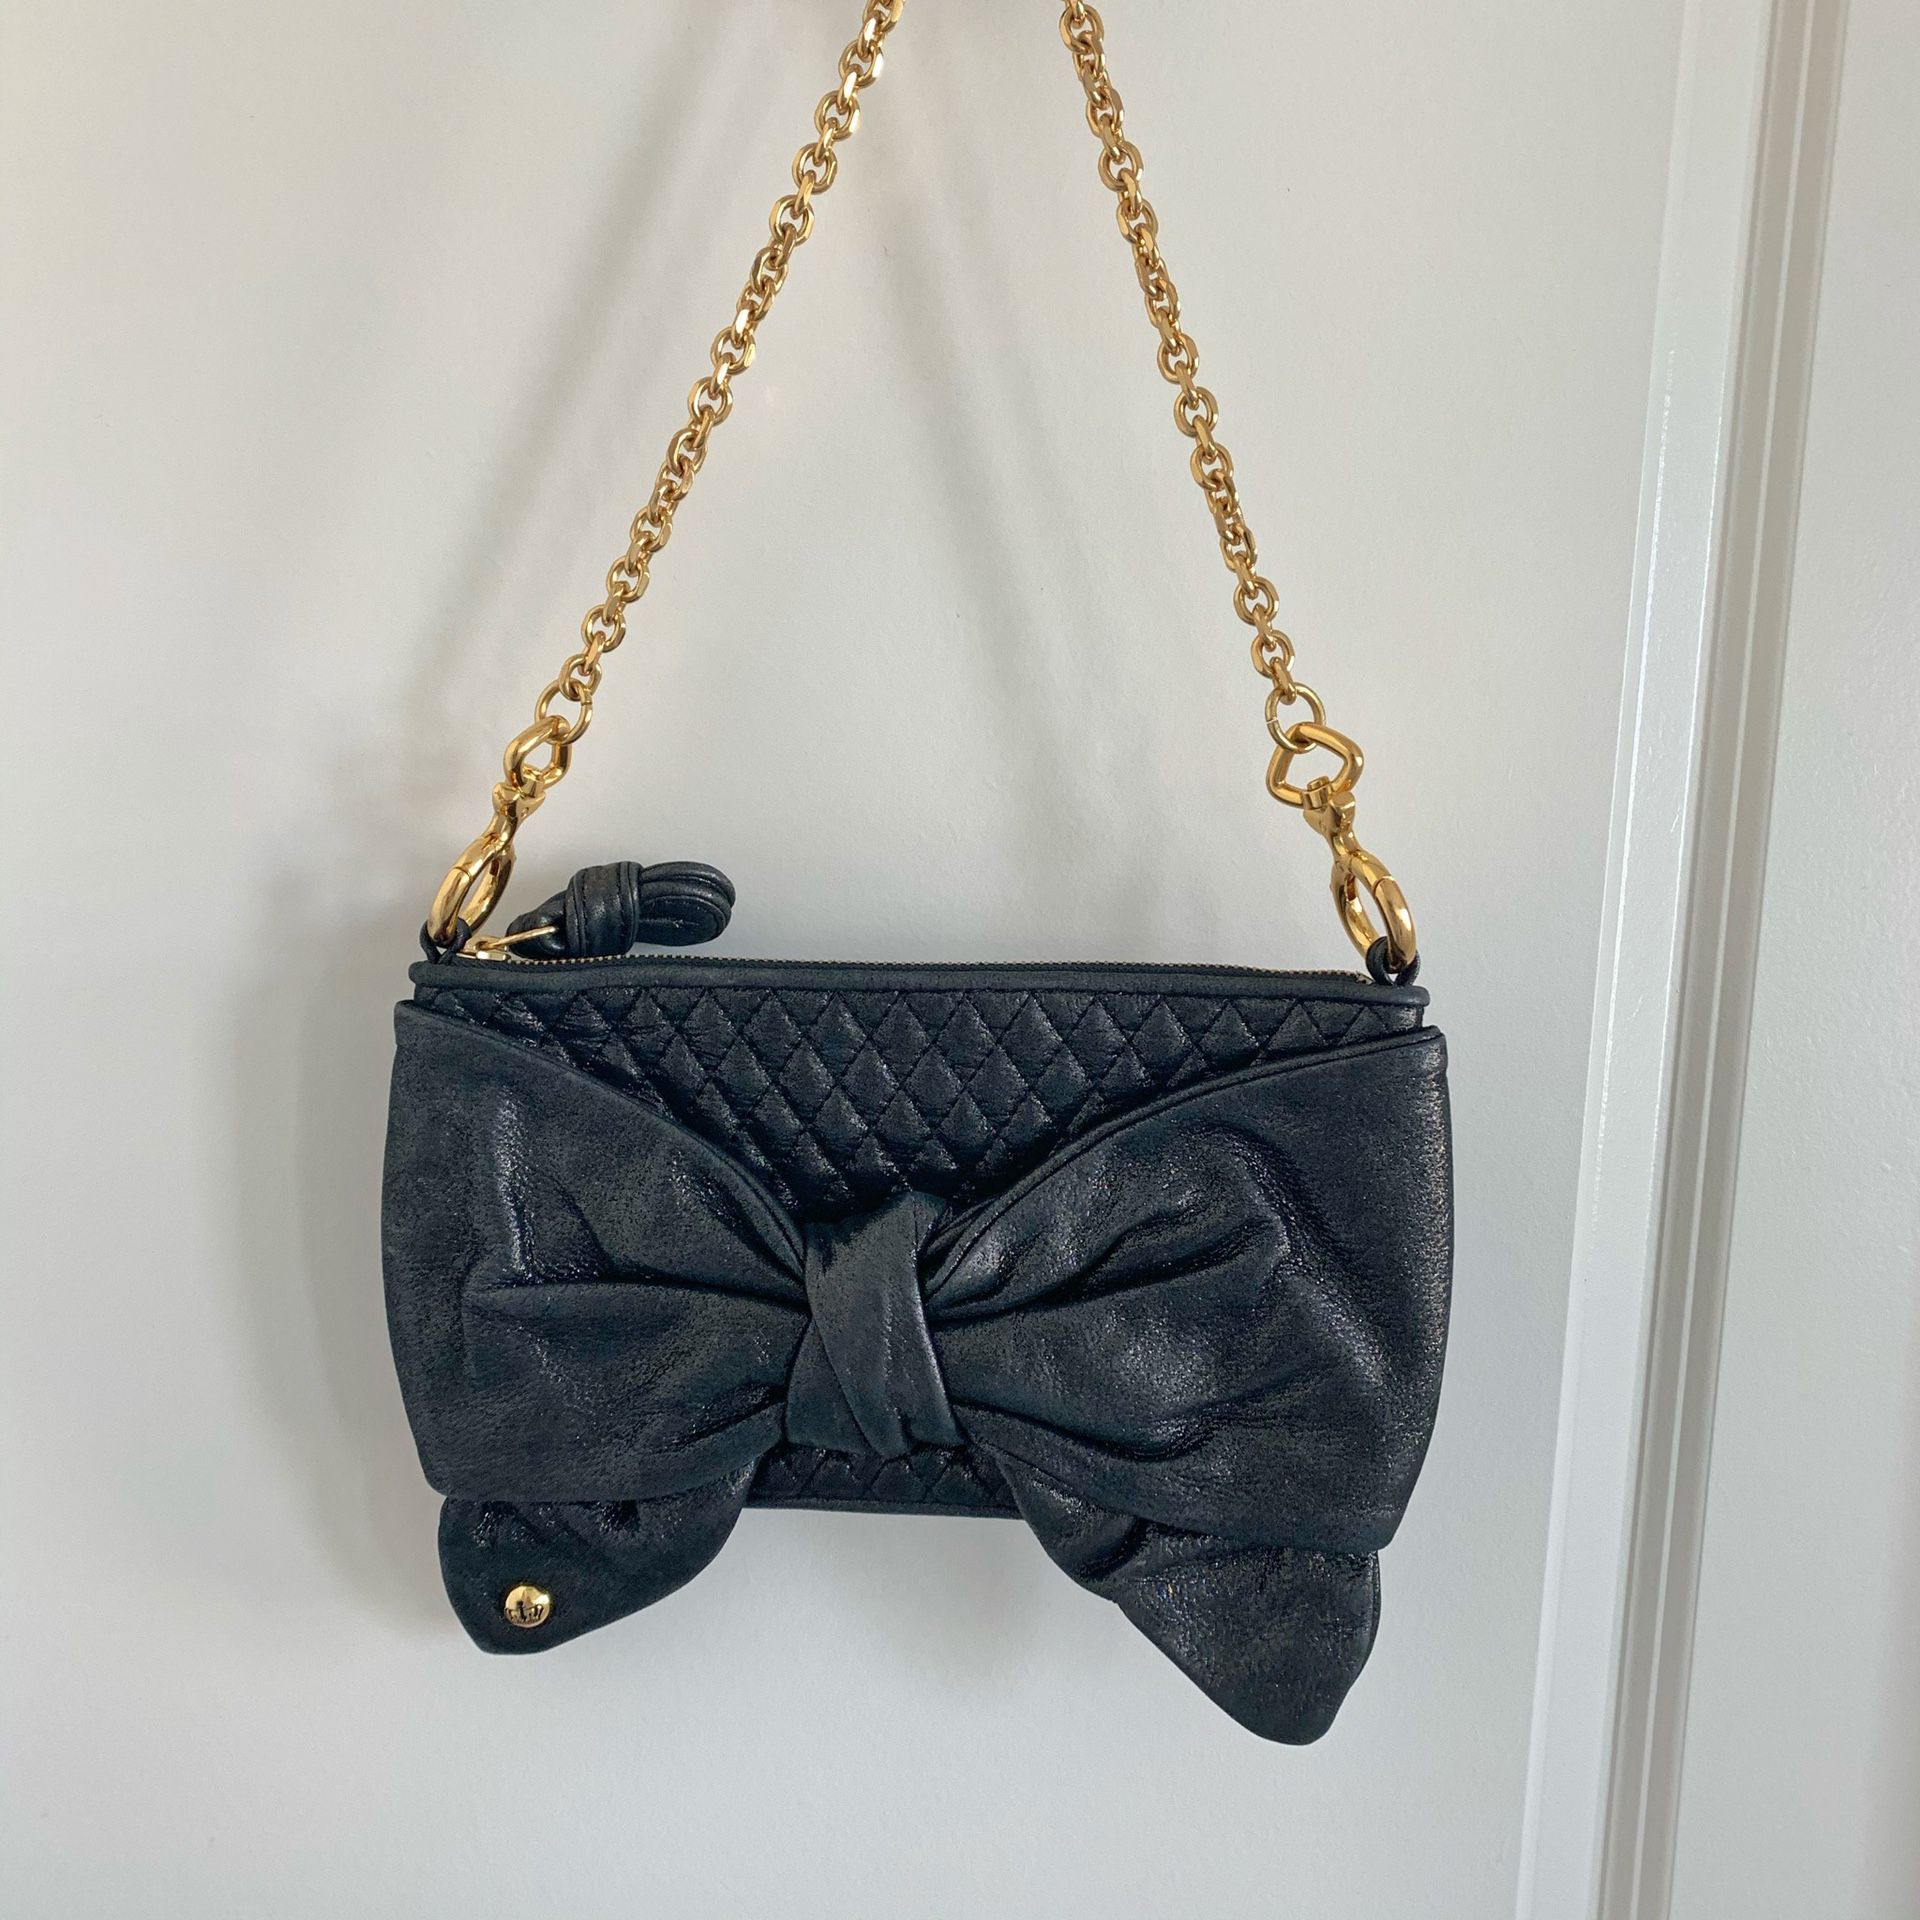 Juicy Couture quilted bow clutch purse with gold chain